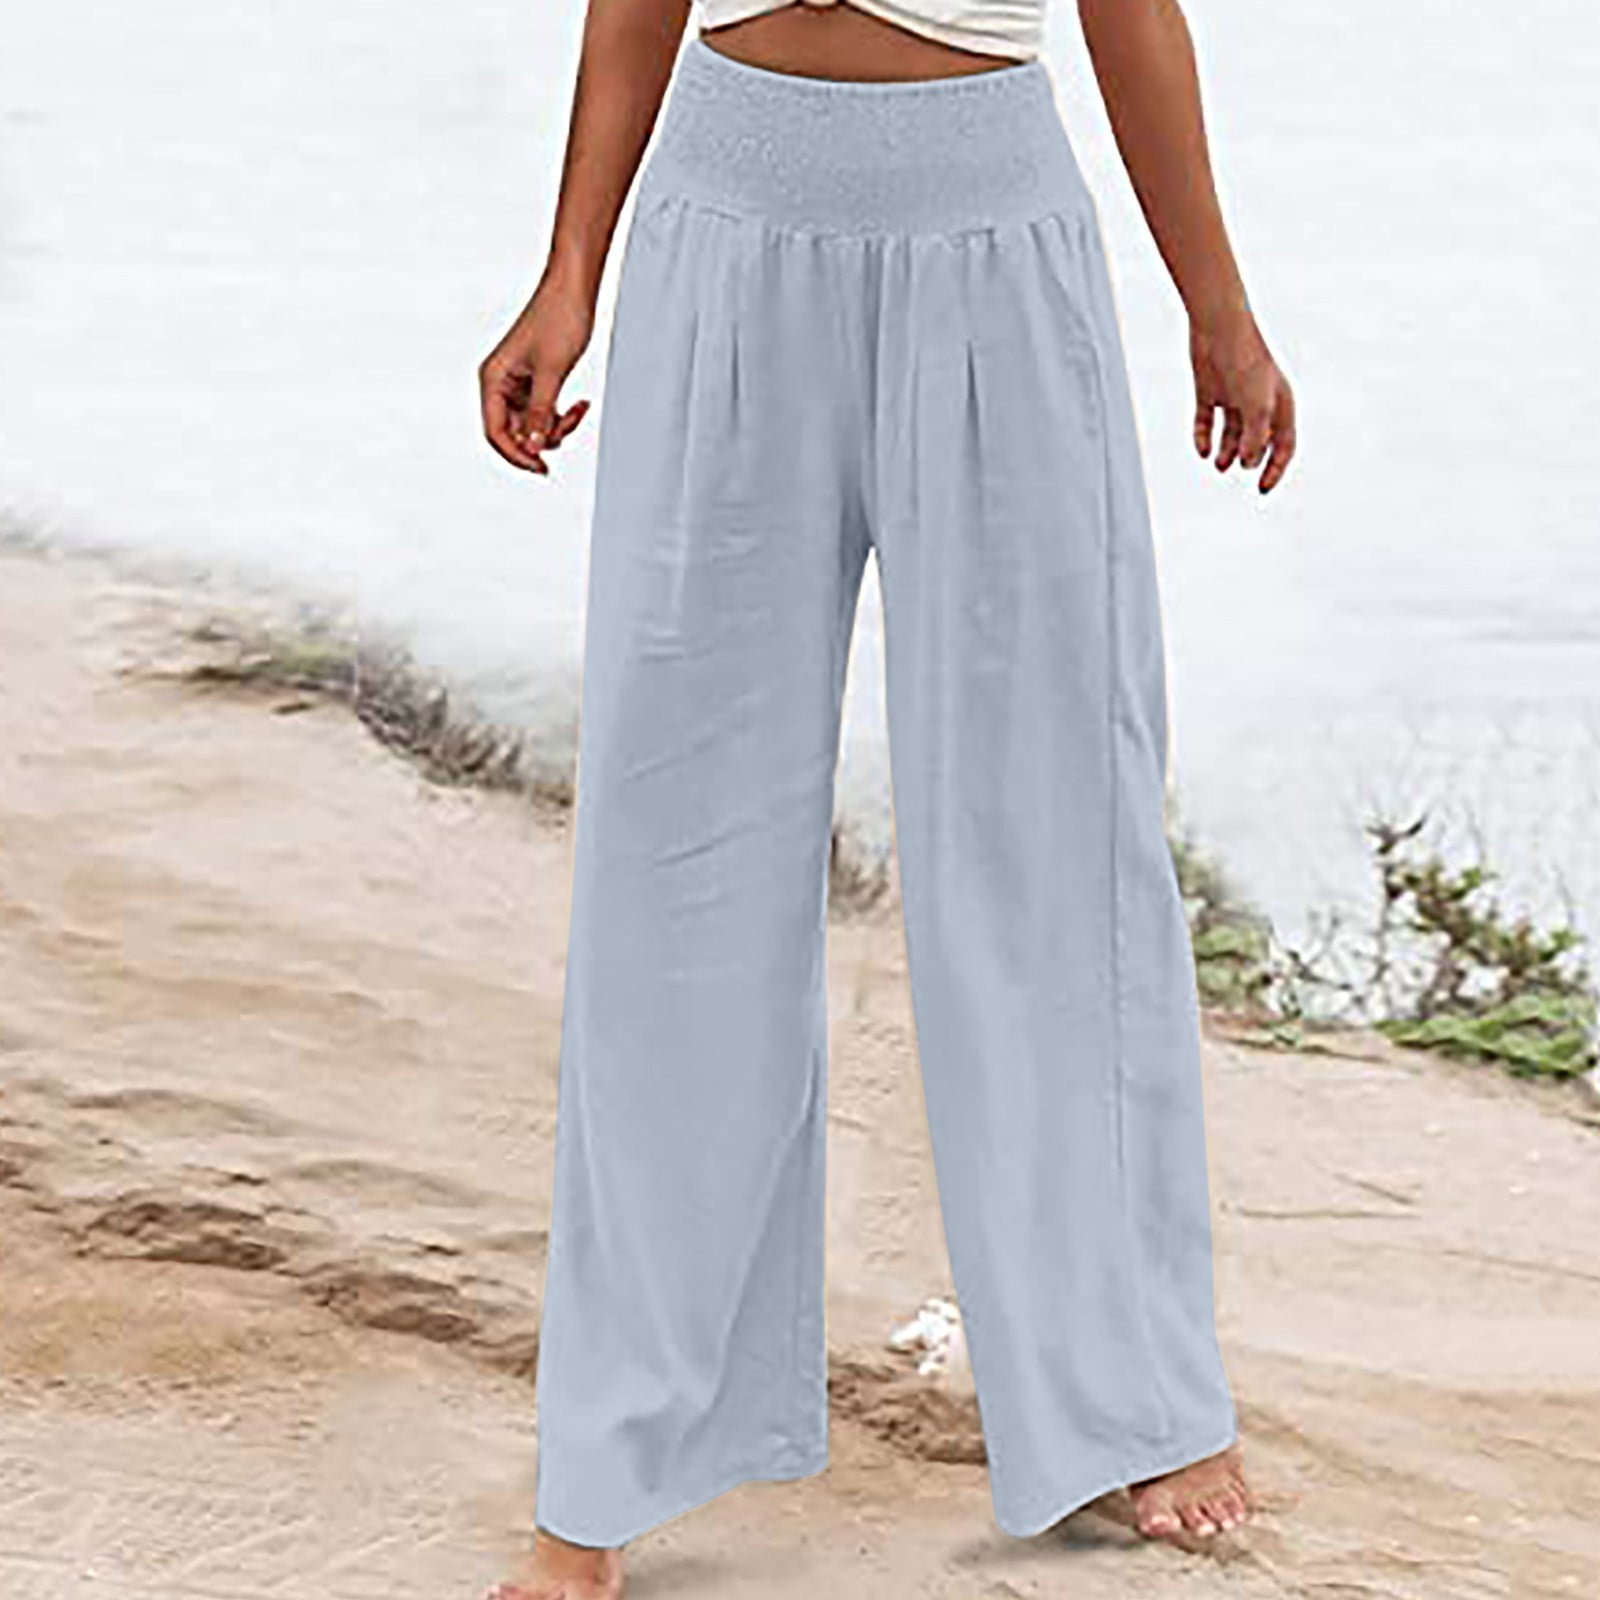 Booker Women's Fashion Casual Stretchy Wide Leg Palazzo Pants Summer  Leisure High Waist Beach Wide Leg Pants Loose Comfortable Color Pants  Trousers